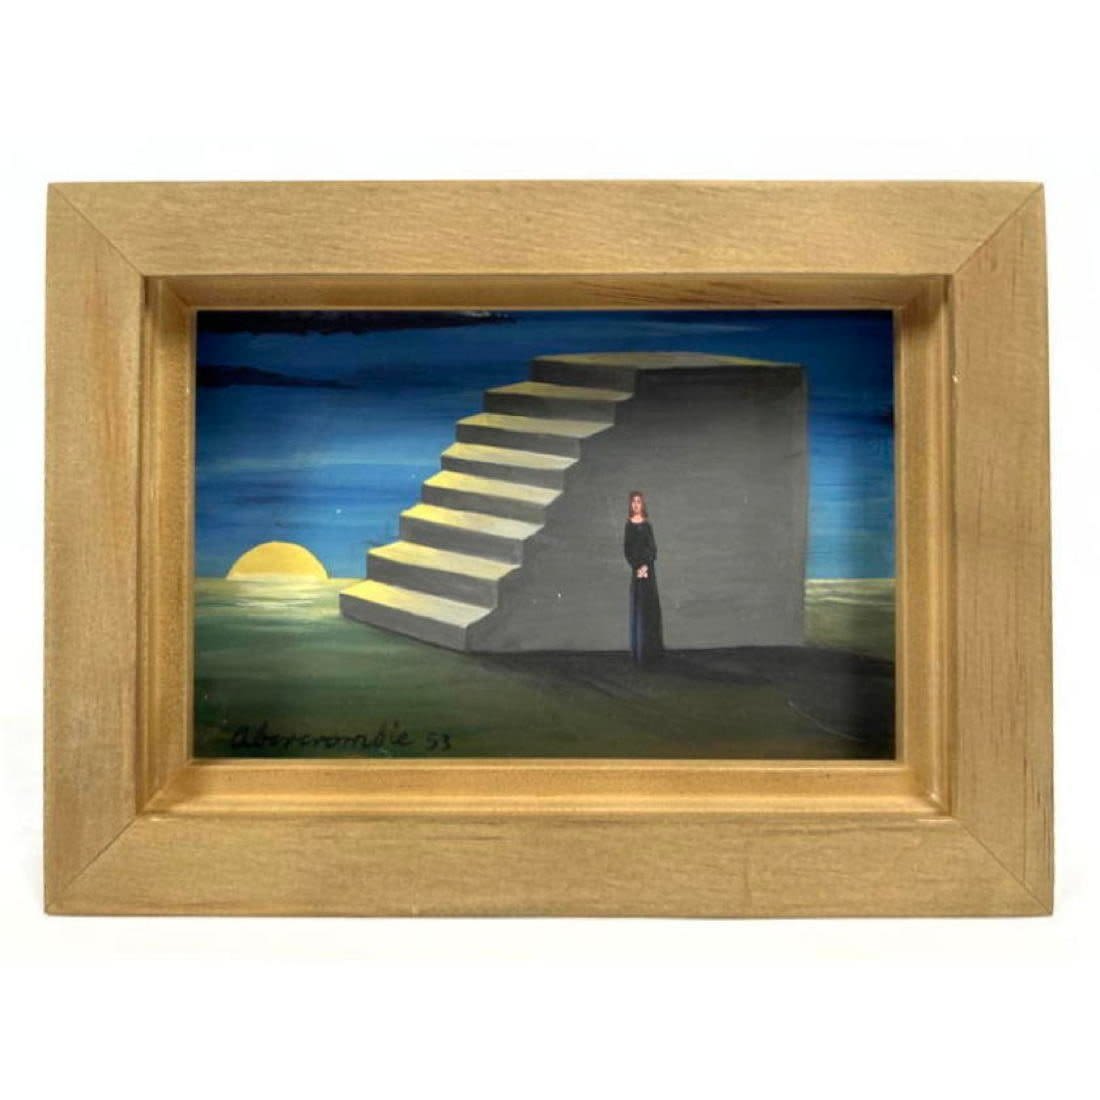 Attributed to Gertrude Abercrombie